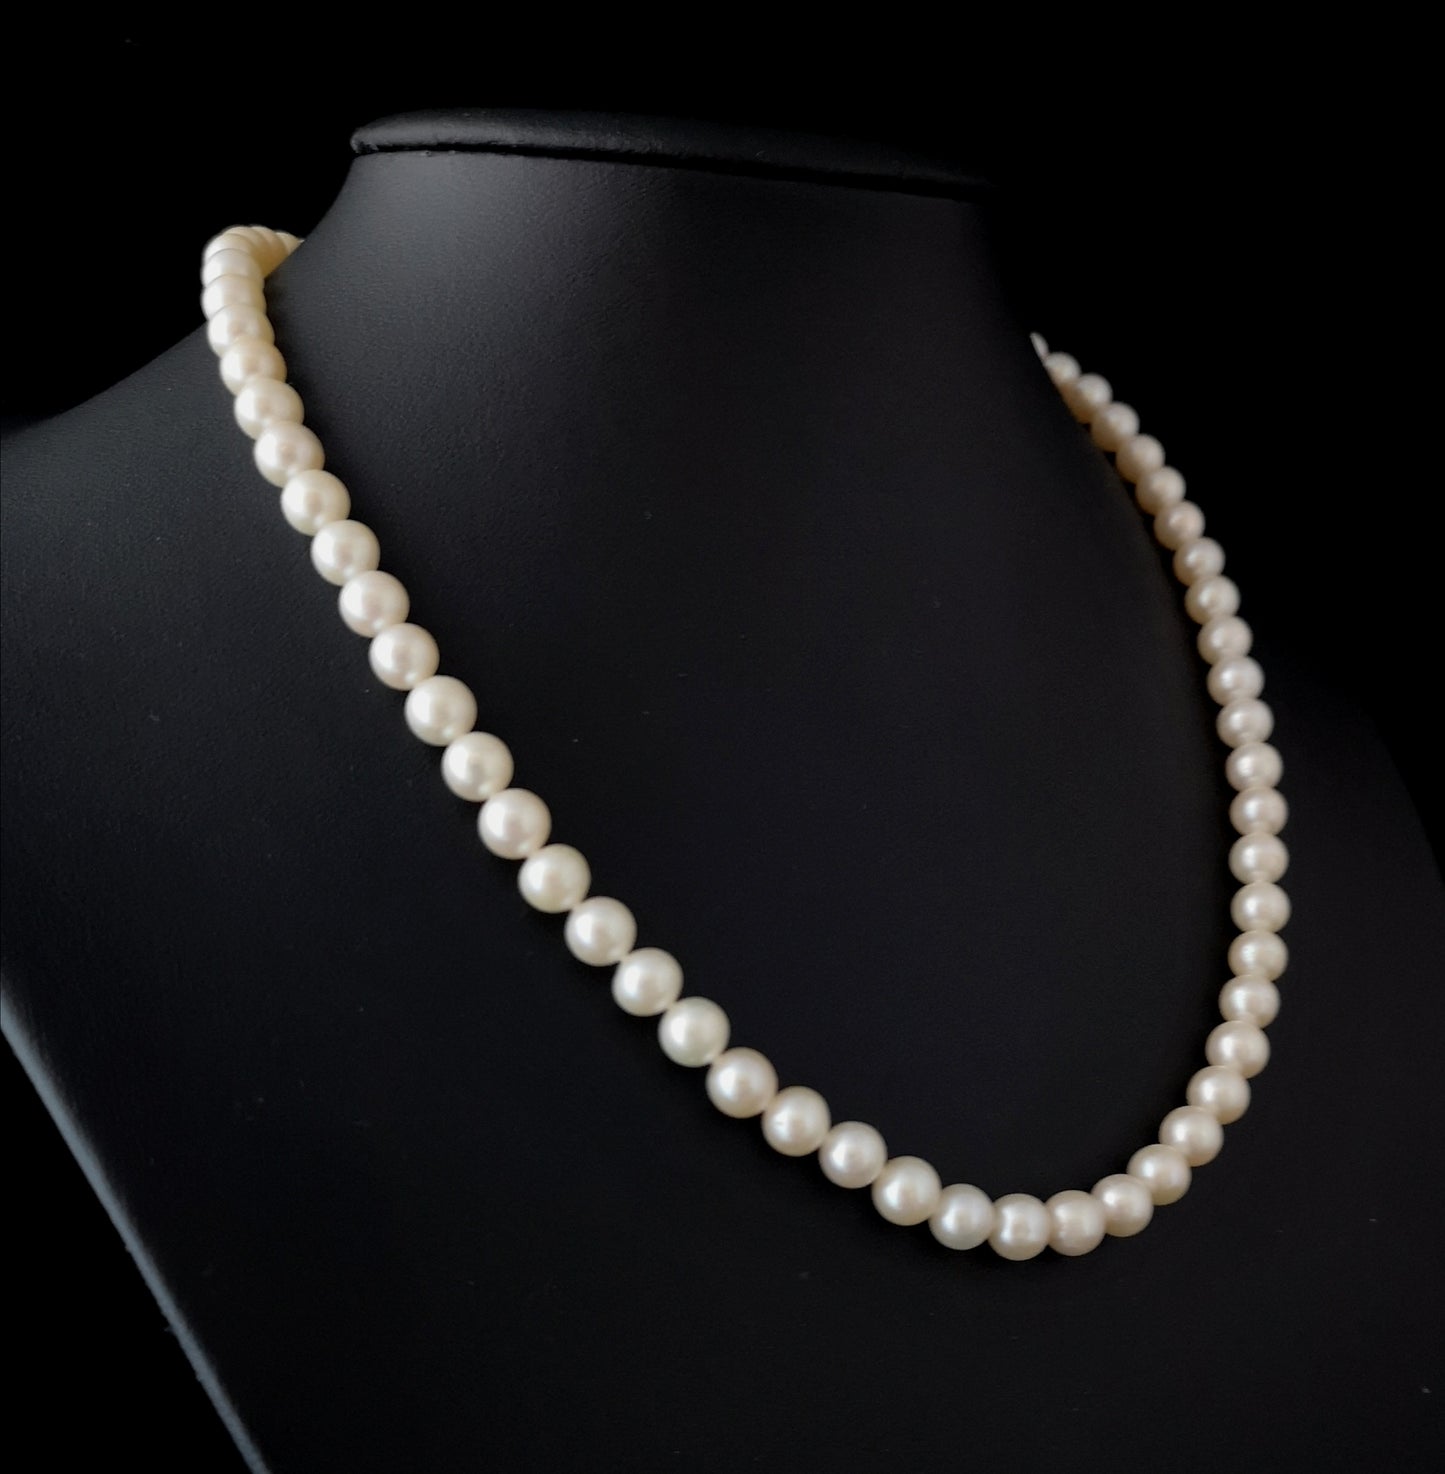 Reserved for Andrew: Vintage 1940s cultured pearl necklace, 14k gold